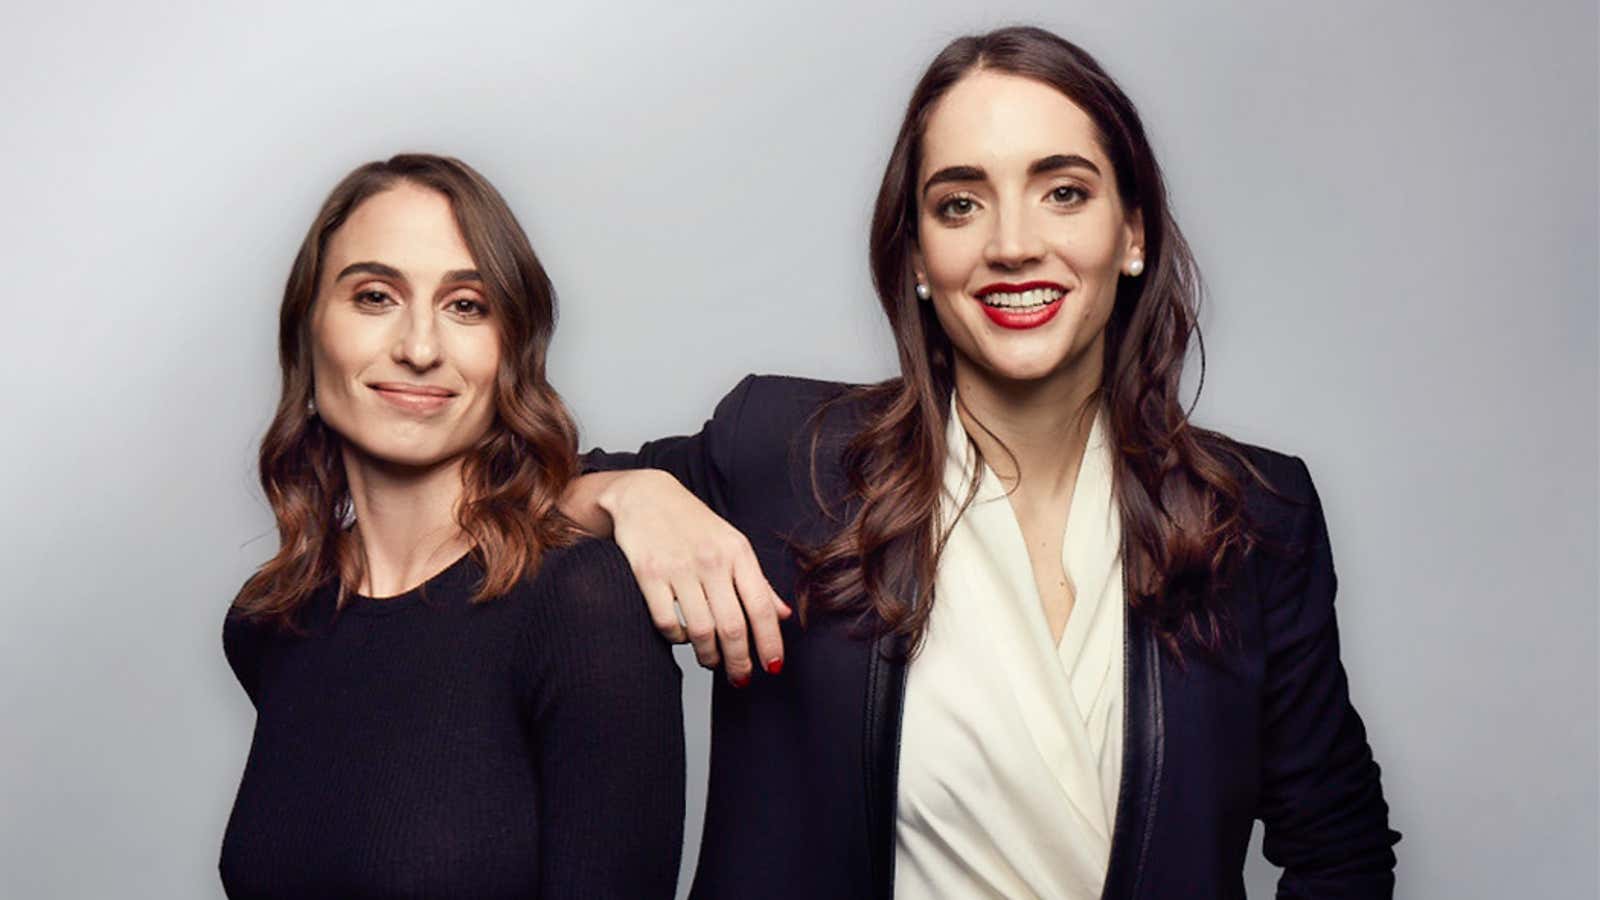 Jessica Beck, left, and Marcela Sapone co-founded Hello Alfred to help women get their time back.